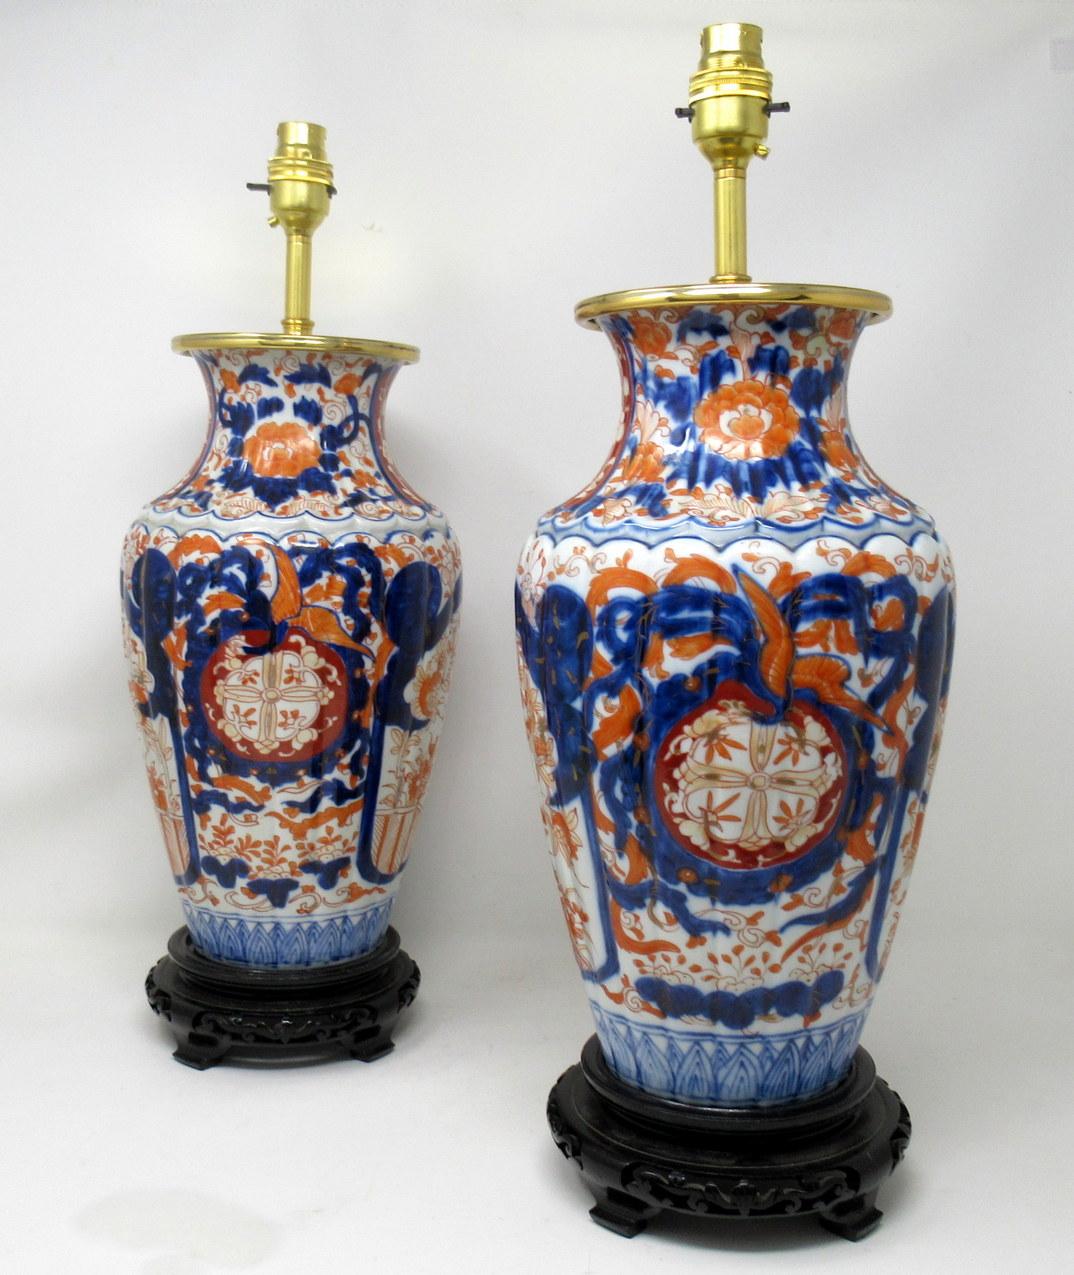 Stunning pair of traditional Japanese Imari Bulbous form Porcelain vases of generous proportions, now converted to a pair of electric table lamps, complete with their original fret work decorative hardwood ebonized circular bases with four block